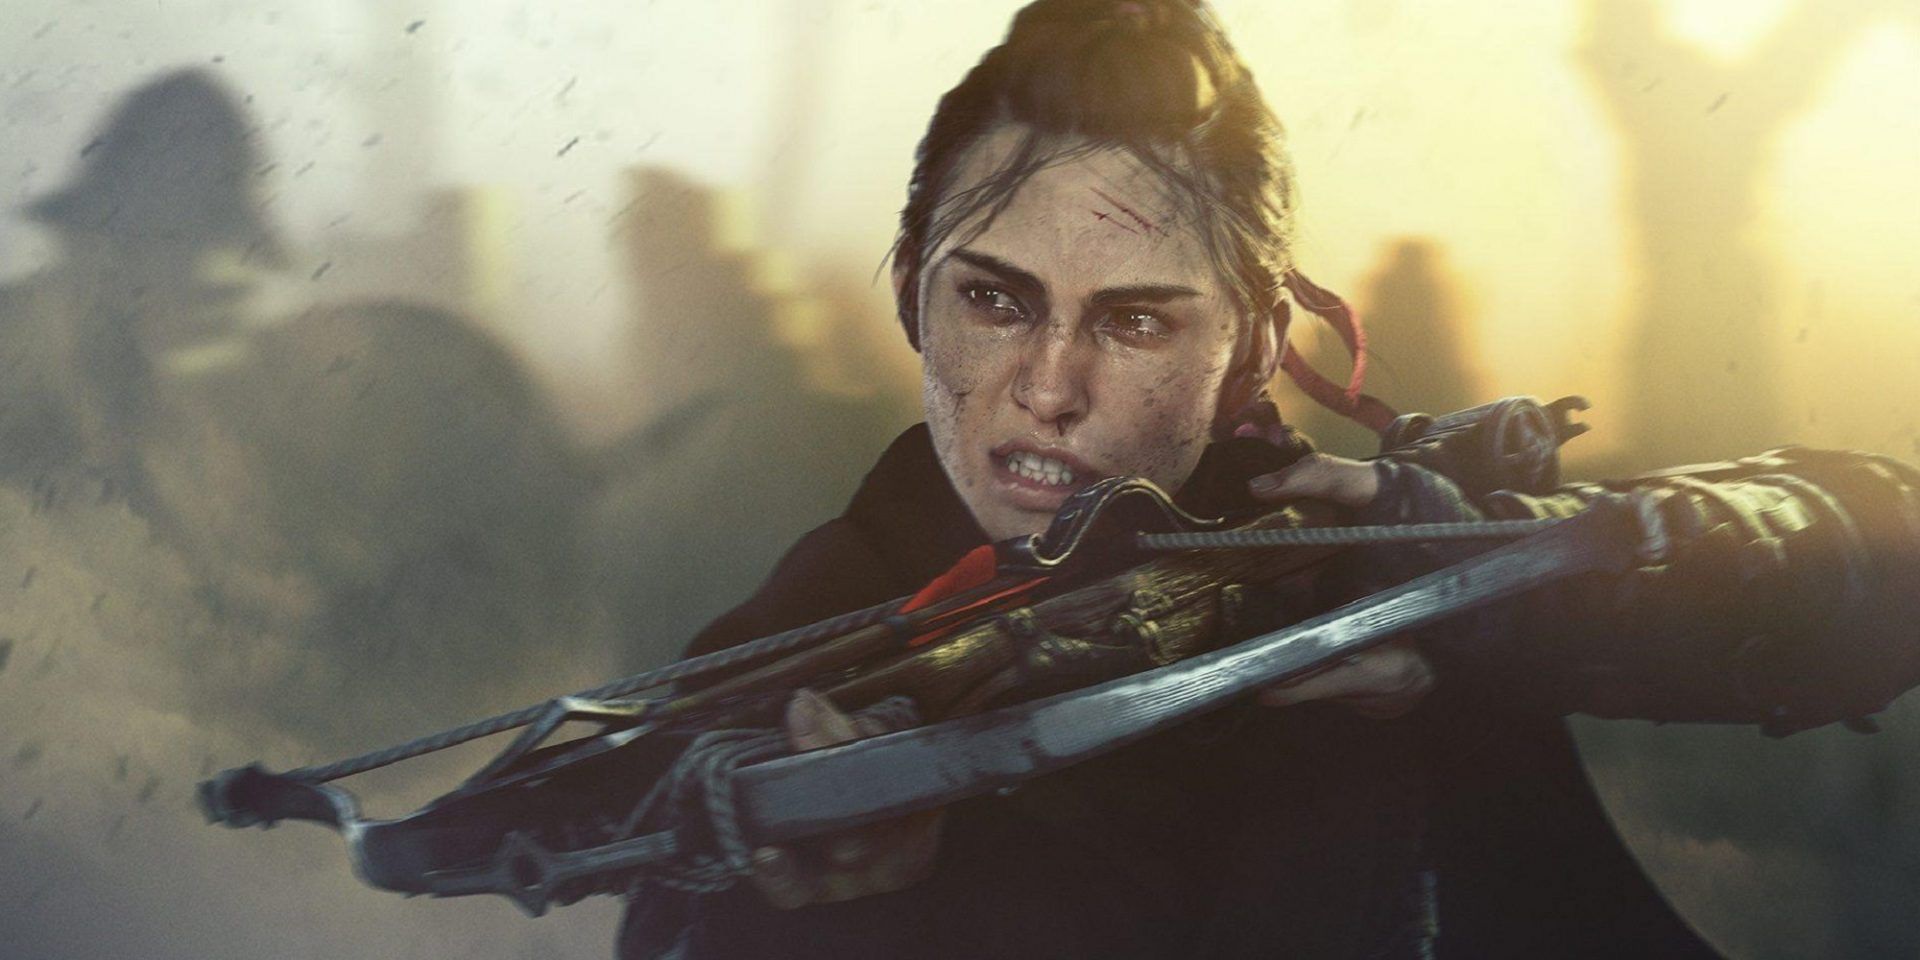 Amicia From A Plague Tale Aiming A Crossbow While Scowling